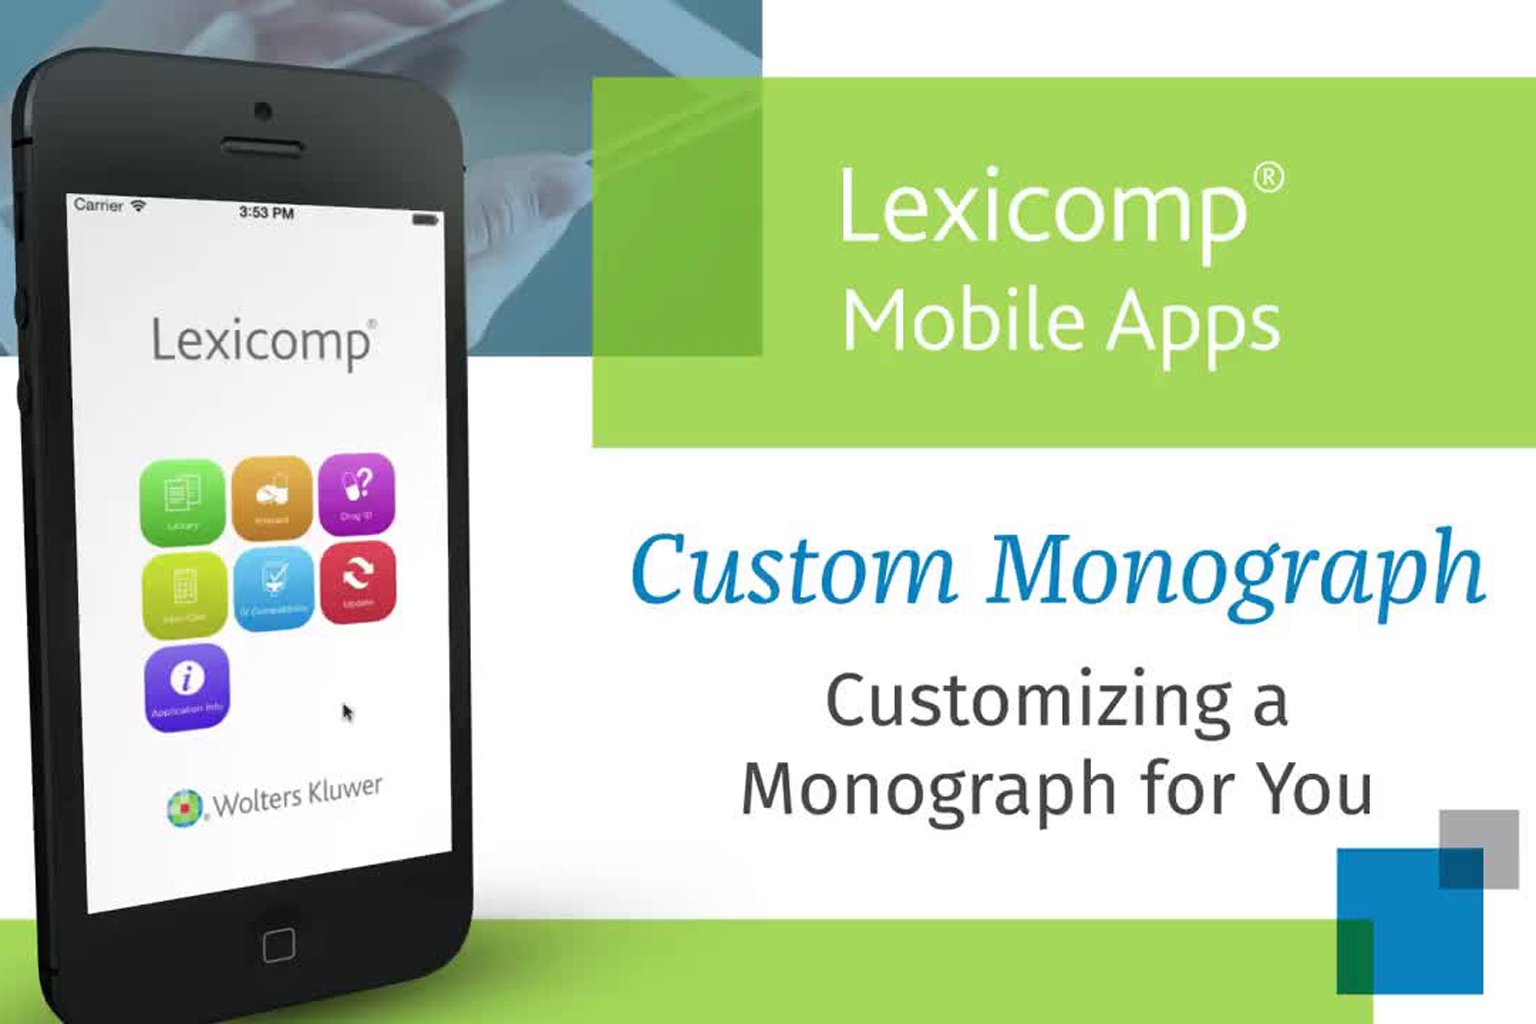 video screen - Lexicomp Mobile App Emailing a Monograph